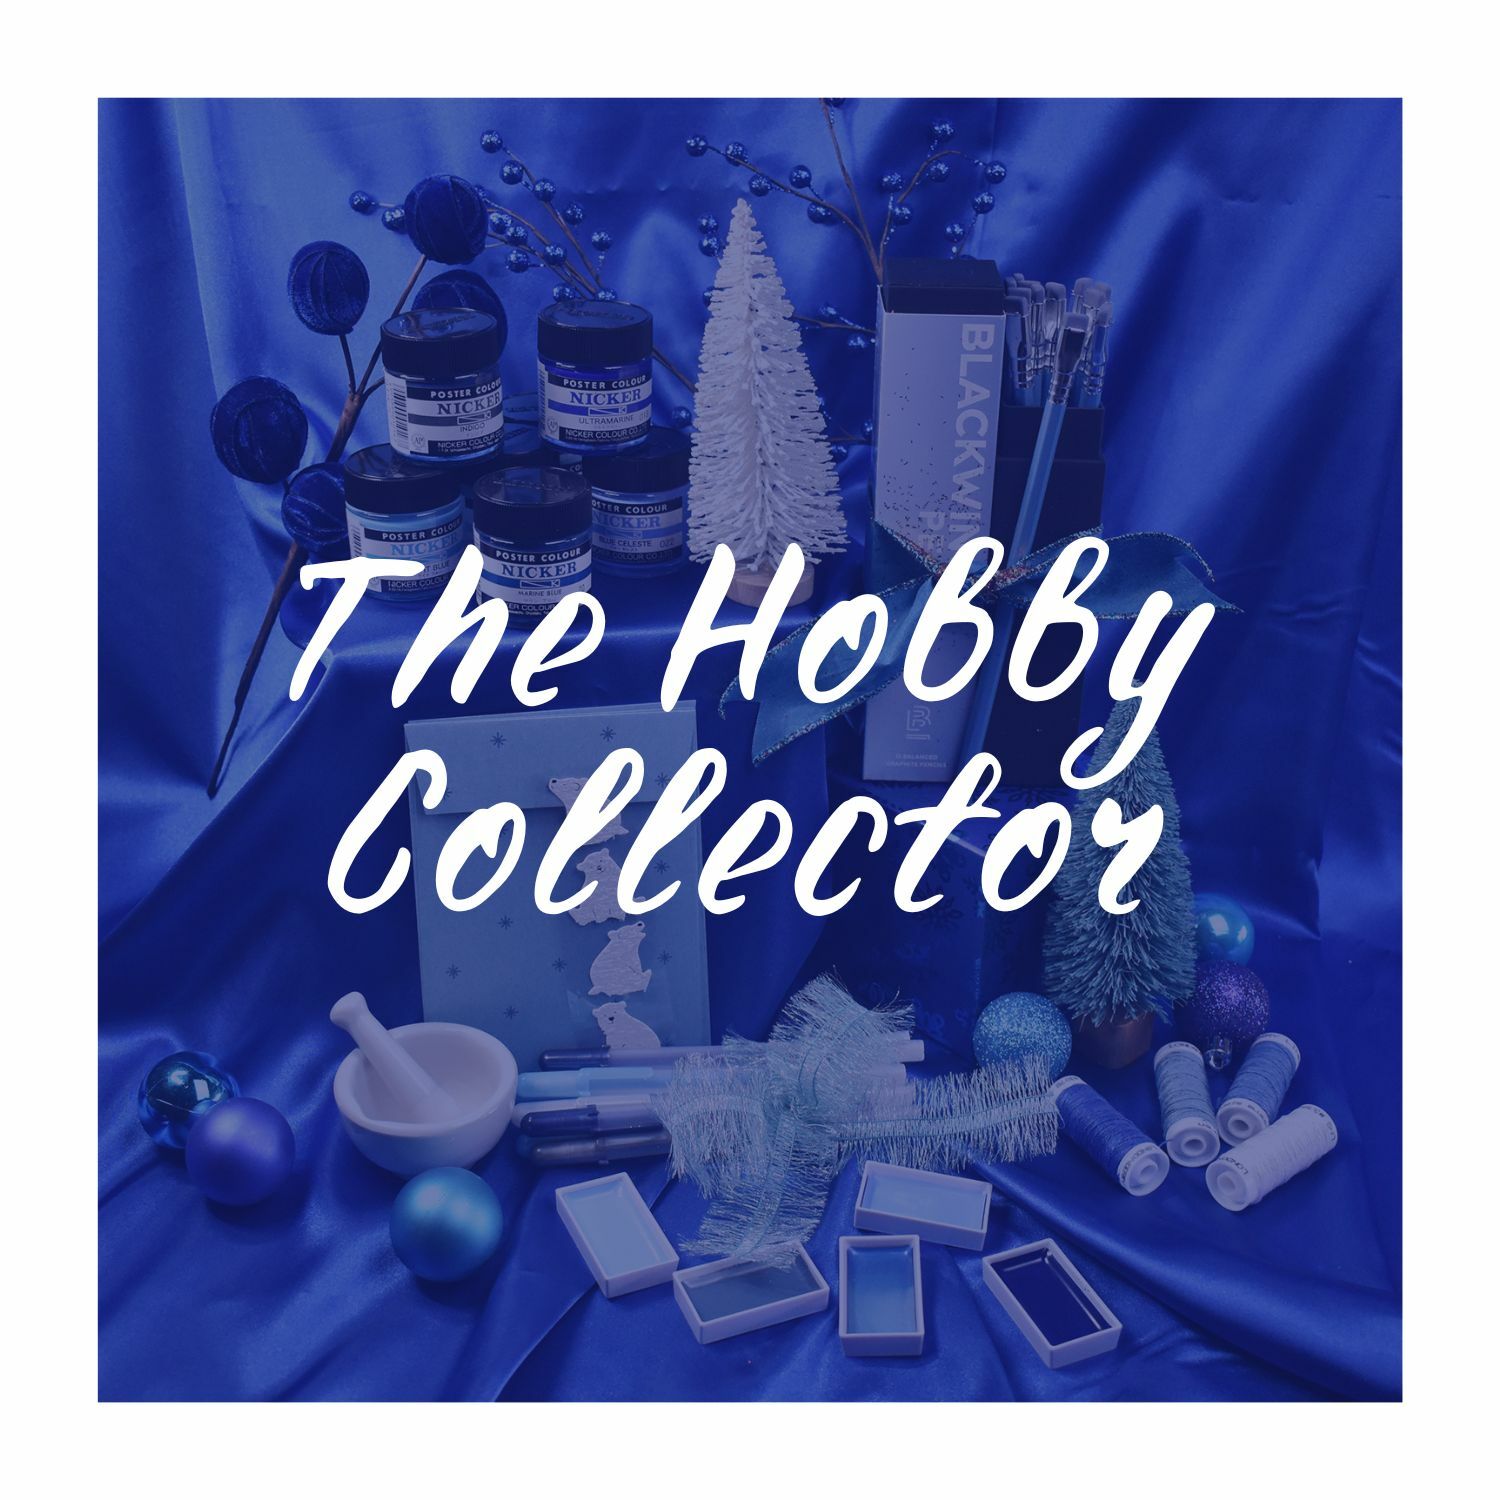 The Hobby Collector